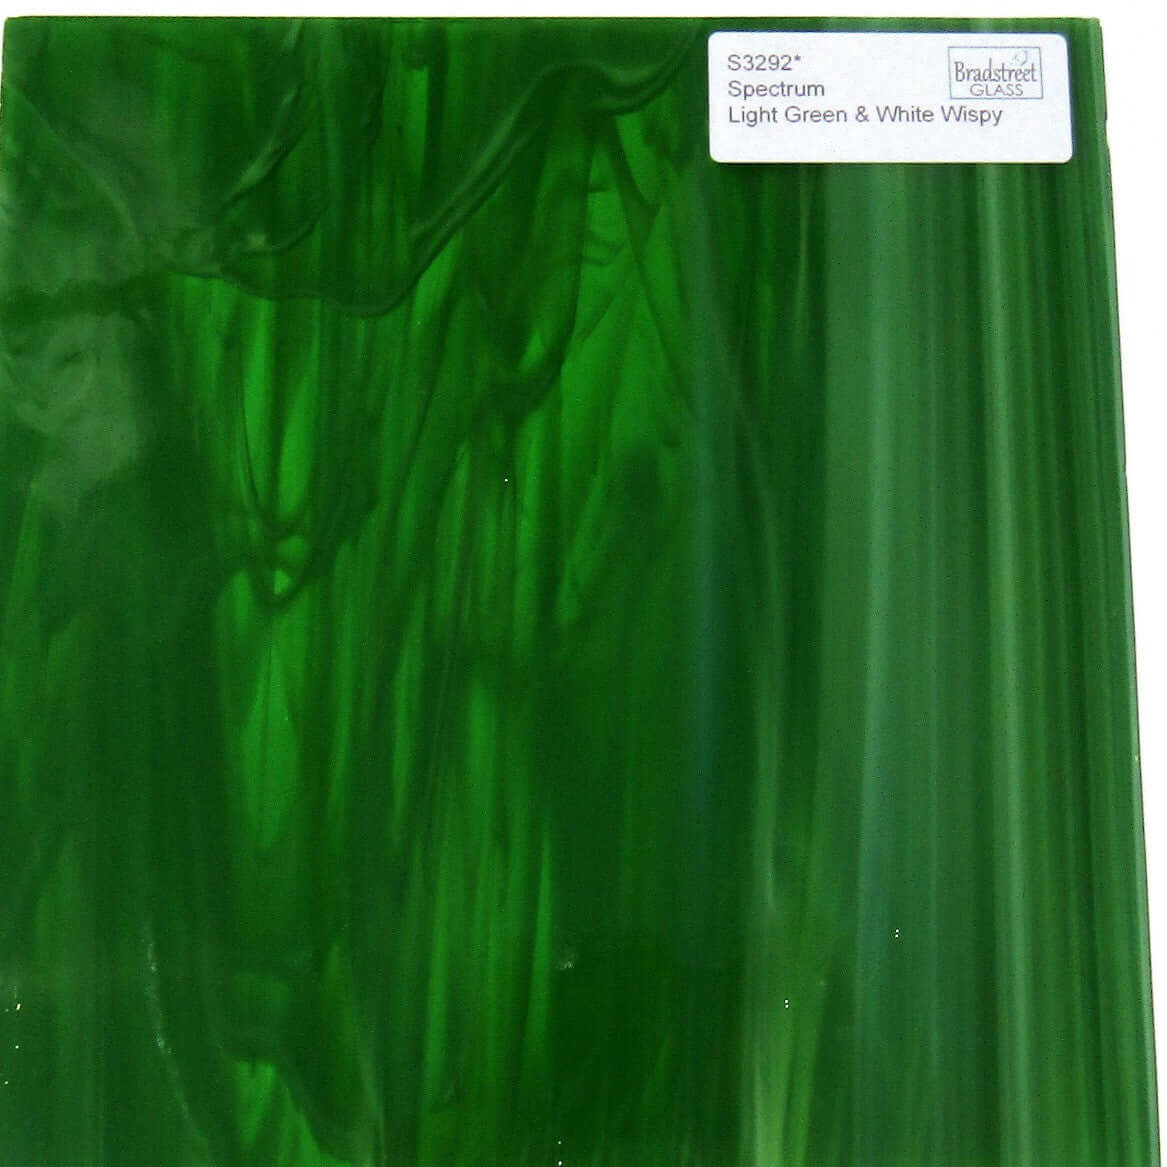 Light Green and White Wispy Stained Glass Sheet 96 COE Fusible Oceanside SF329.2